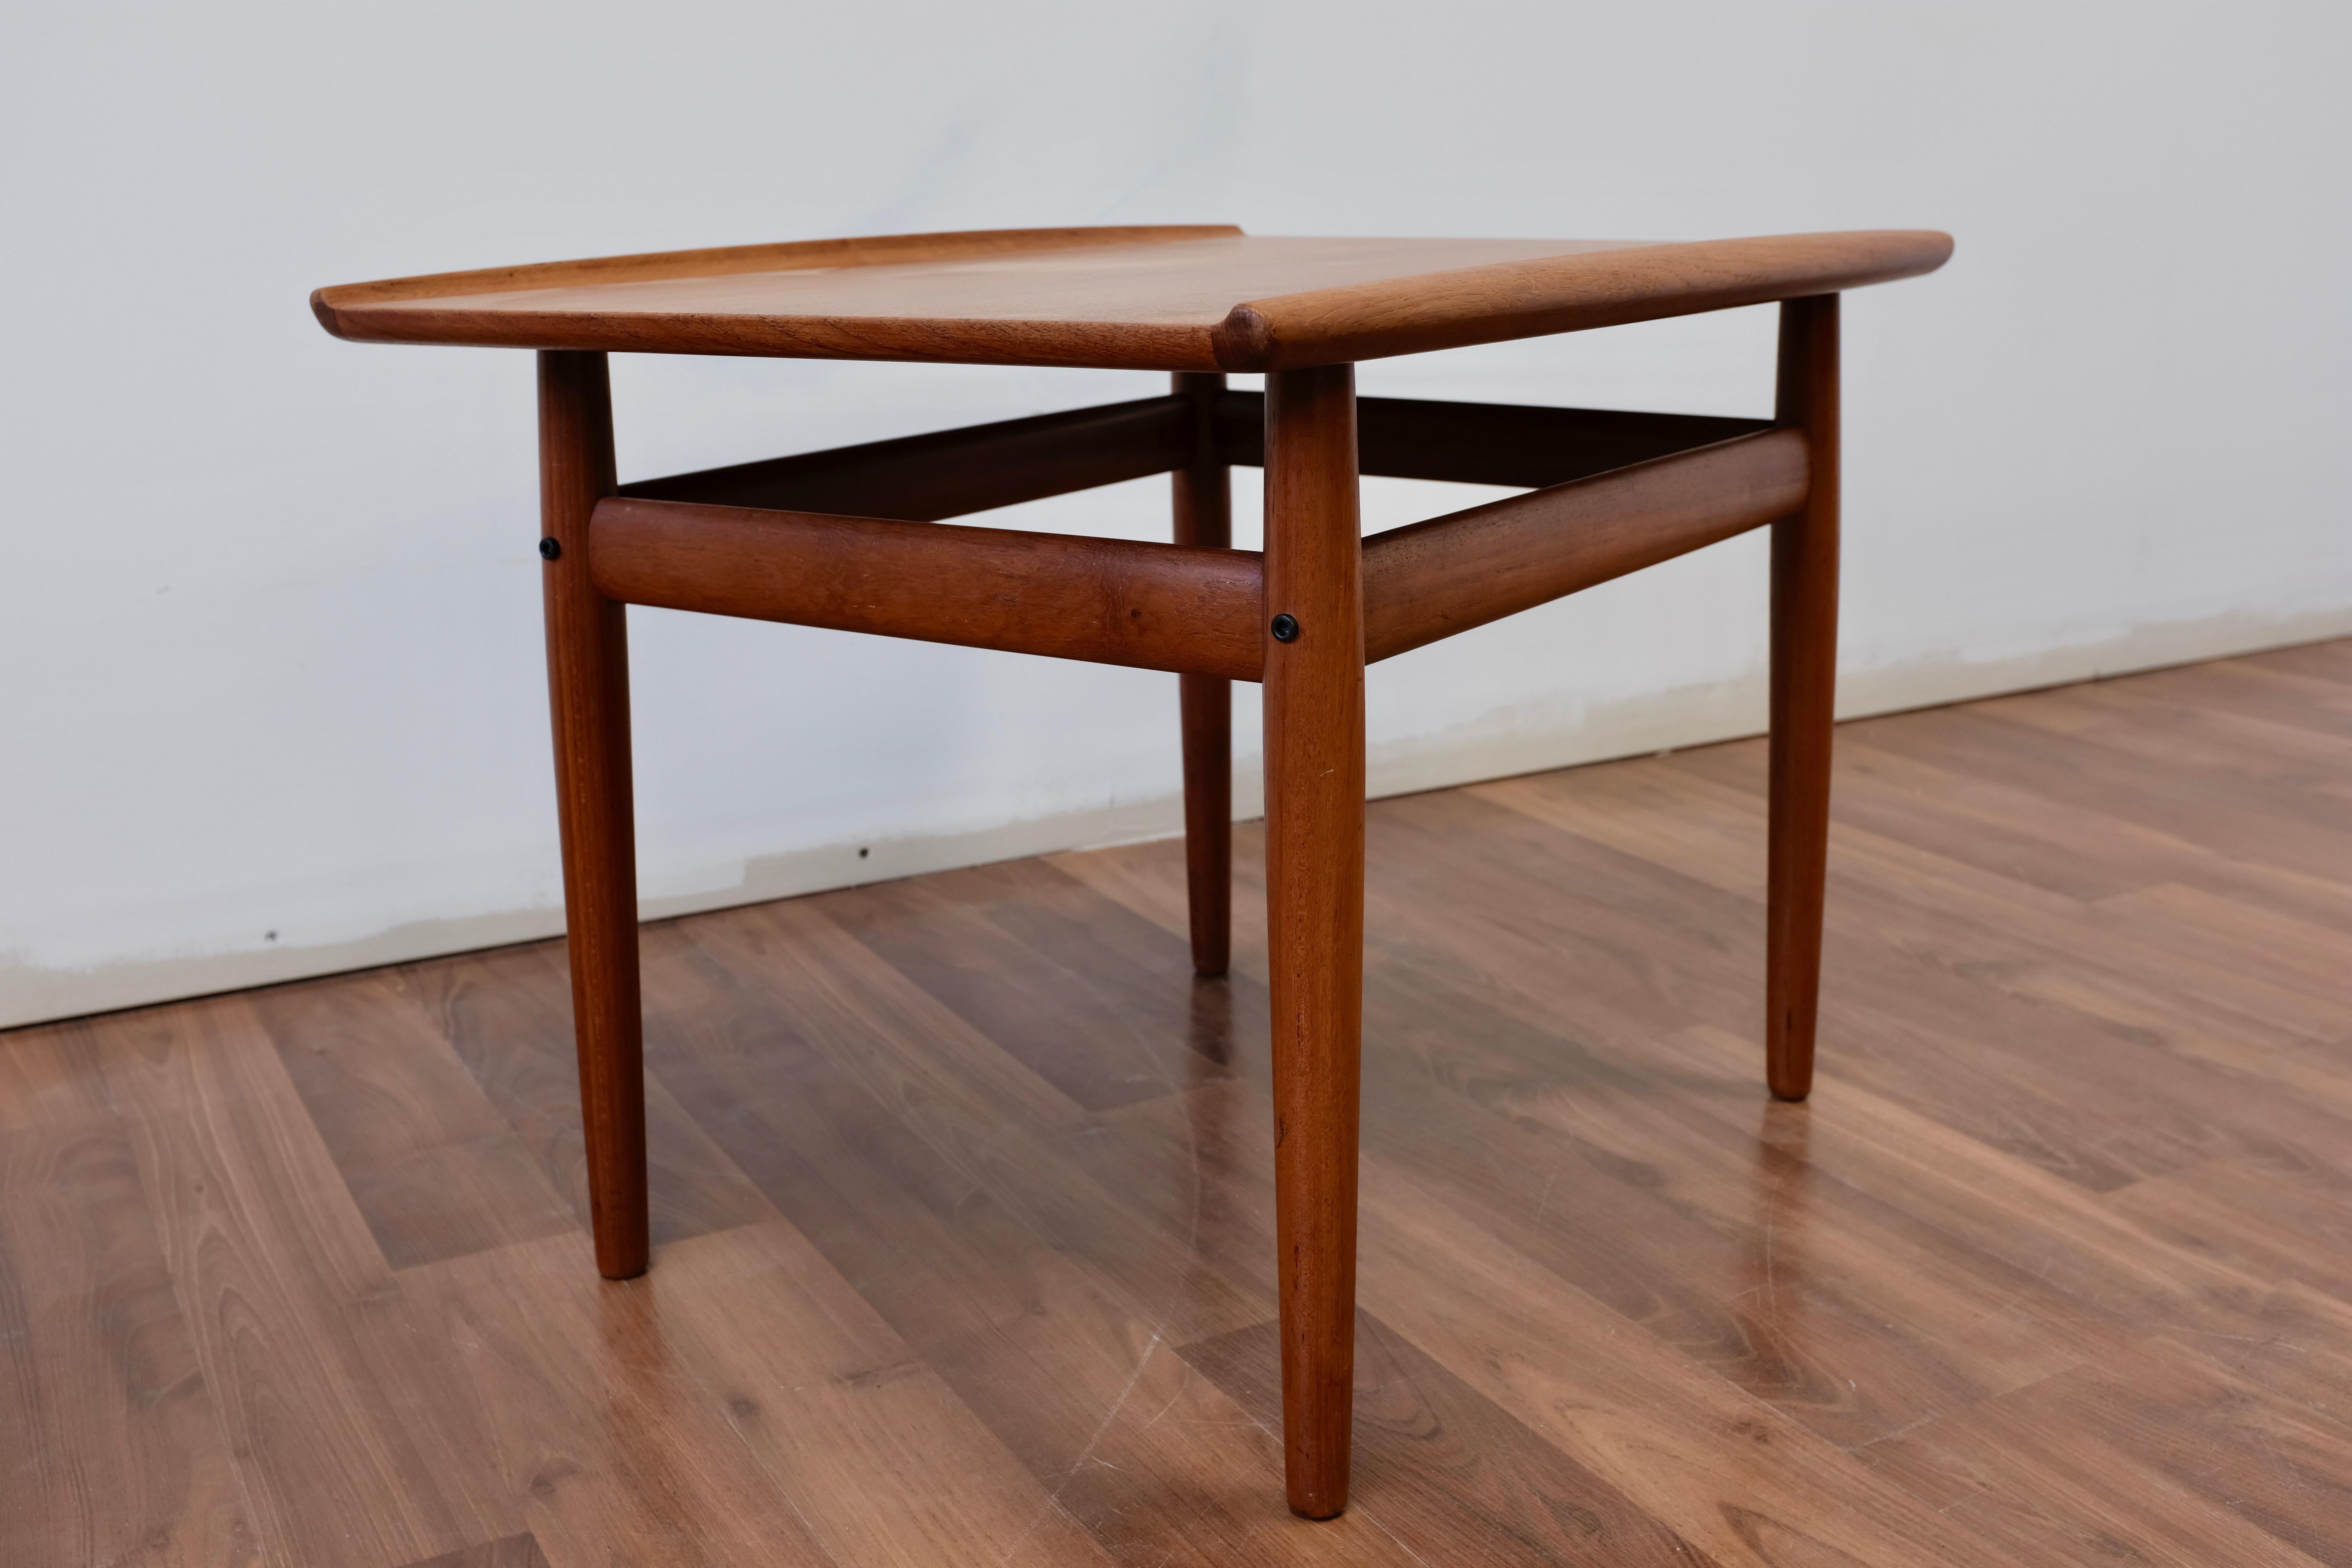 End table designed by Grete Jalk and made in Denmark by Glostrup Møbelfabrik.

Solid teak frame, teak veneered top with distinctive solid teak lipped edging. All joinery is solid and wood surfaces show minimal wear.